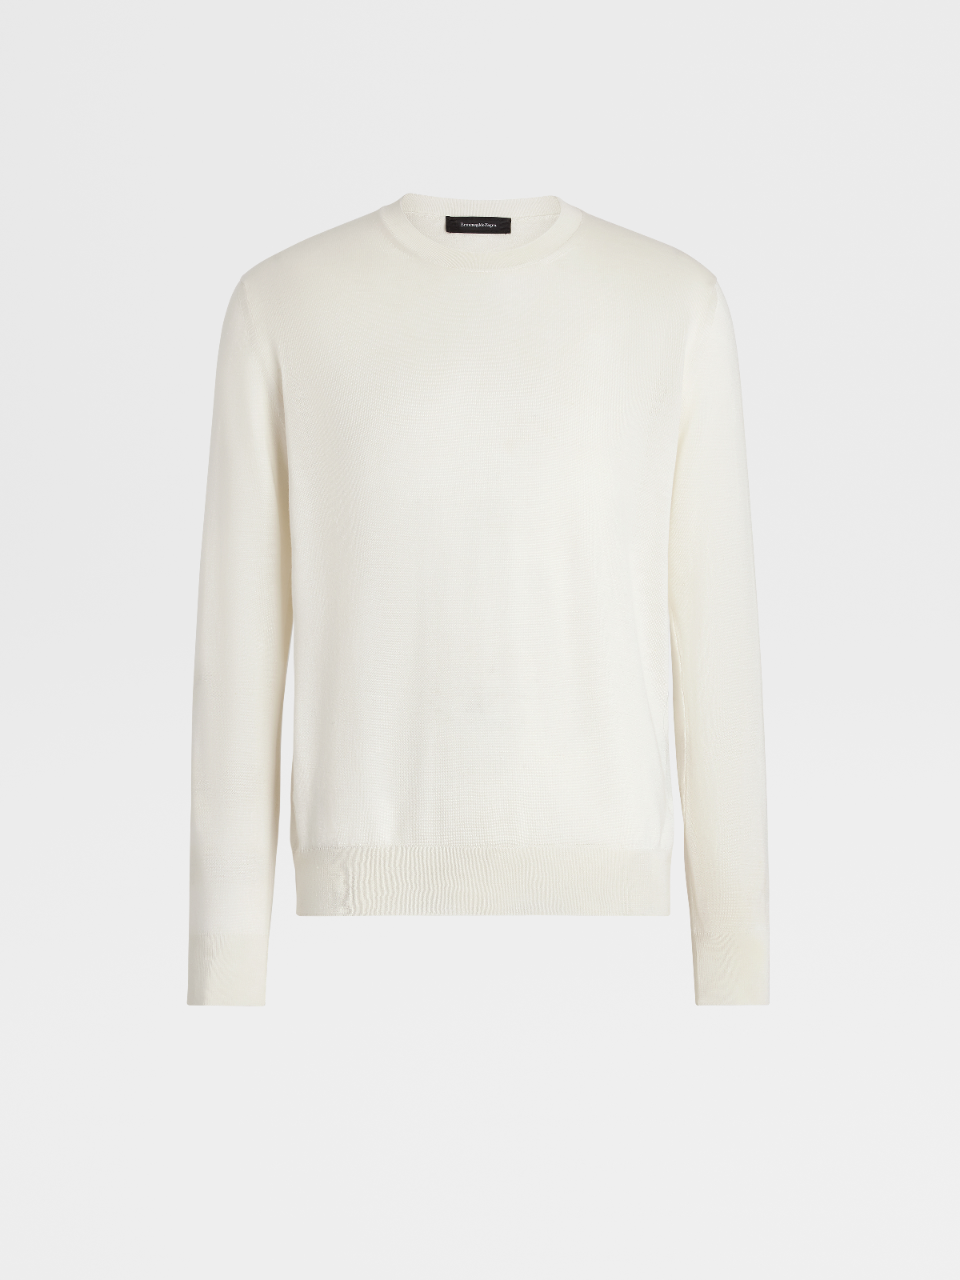 White Faded Silk Cashmere and Linen Knit Crewneck